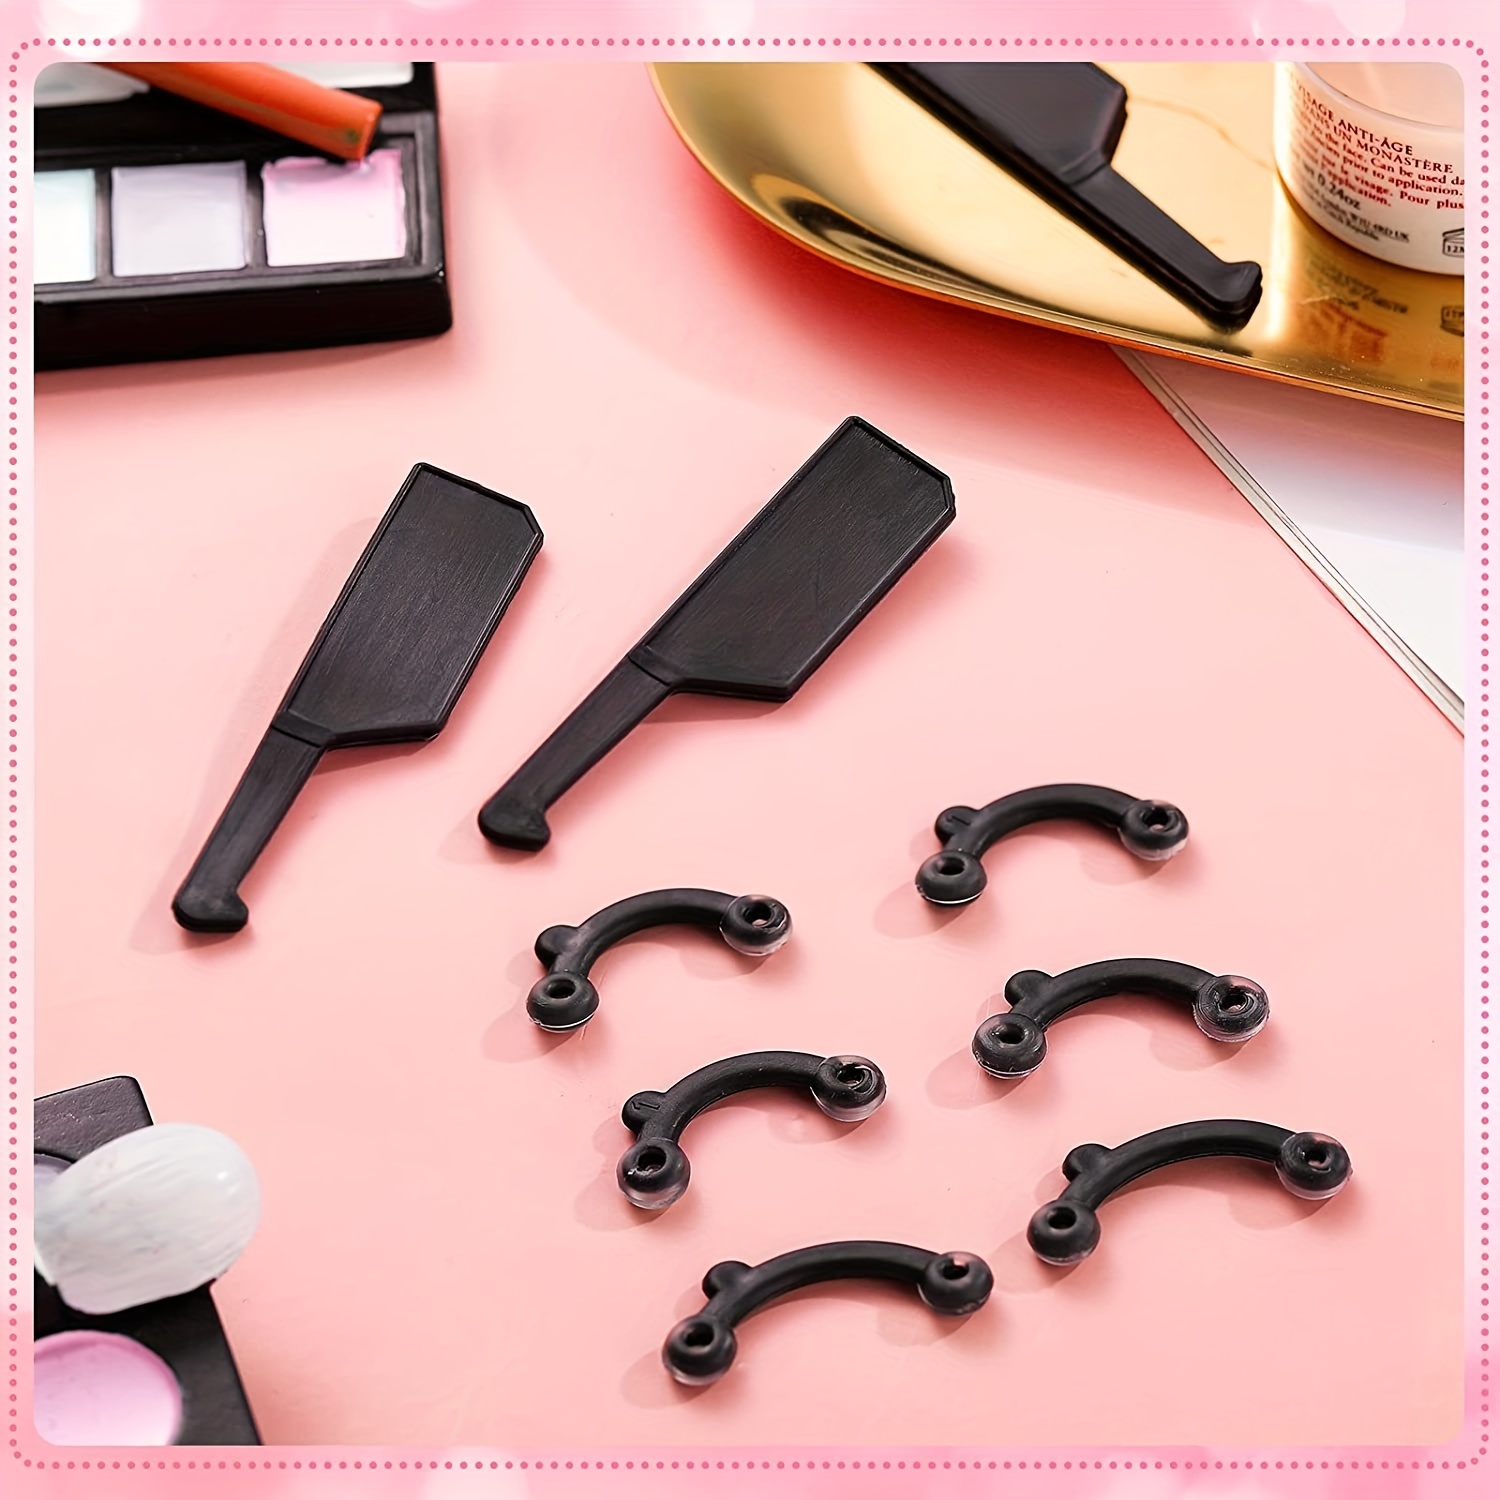 NOSE SHAPING ROLLER Salon Beauty Clip Nose Slimmer Tightening Nose Beauty  Acc ^^ $5.61 - PicClick AU